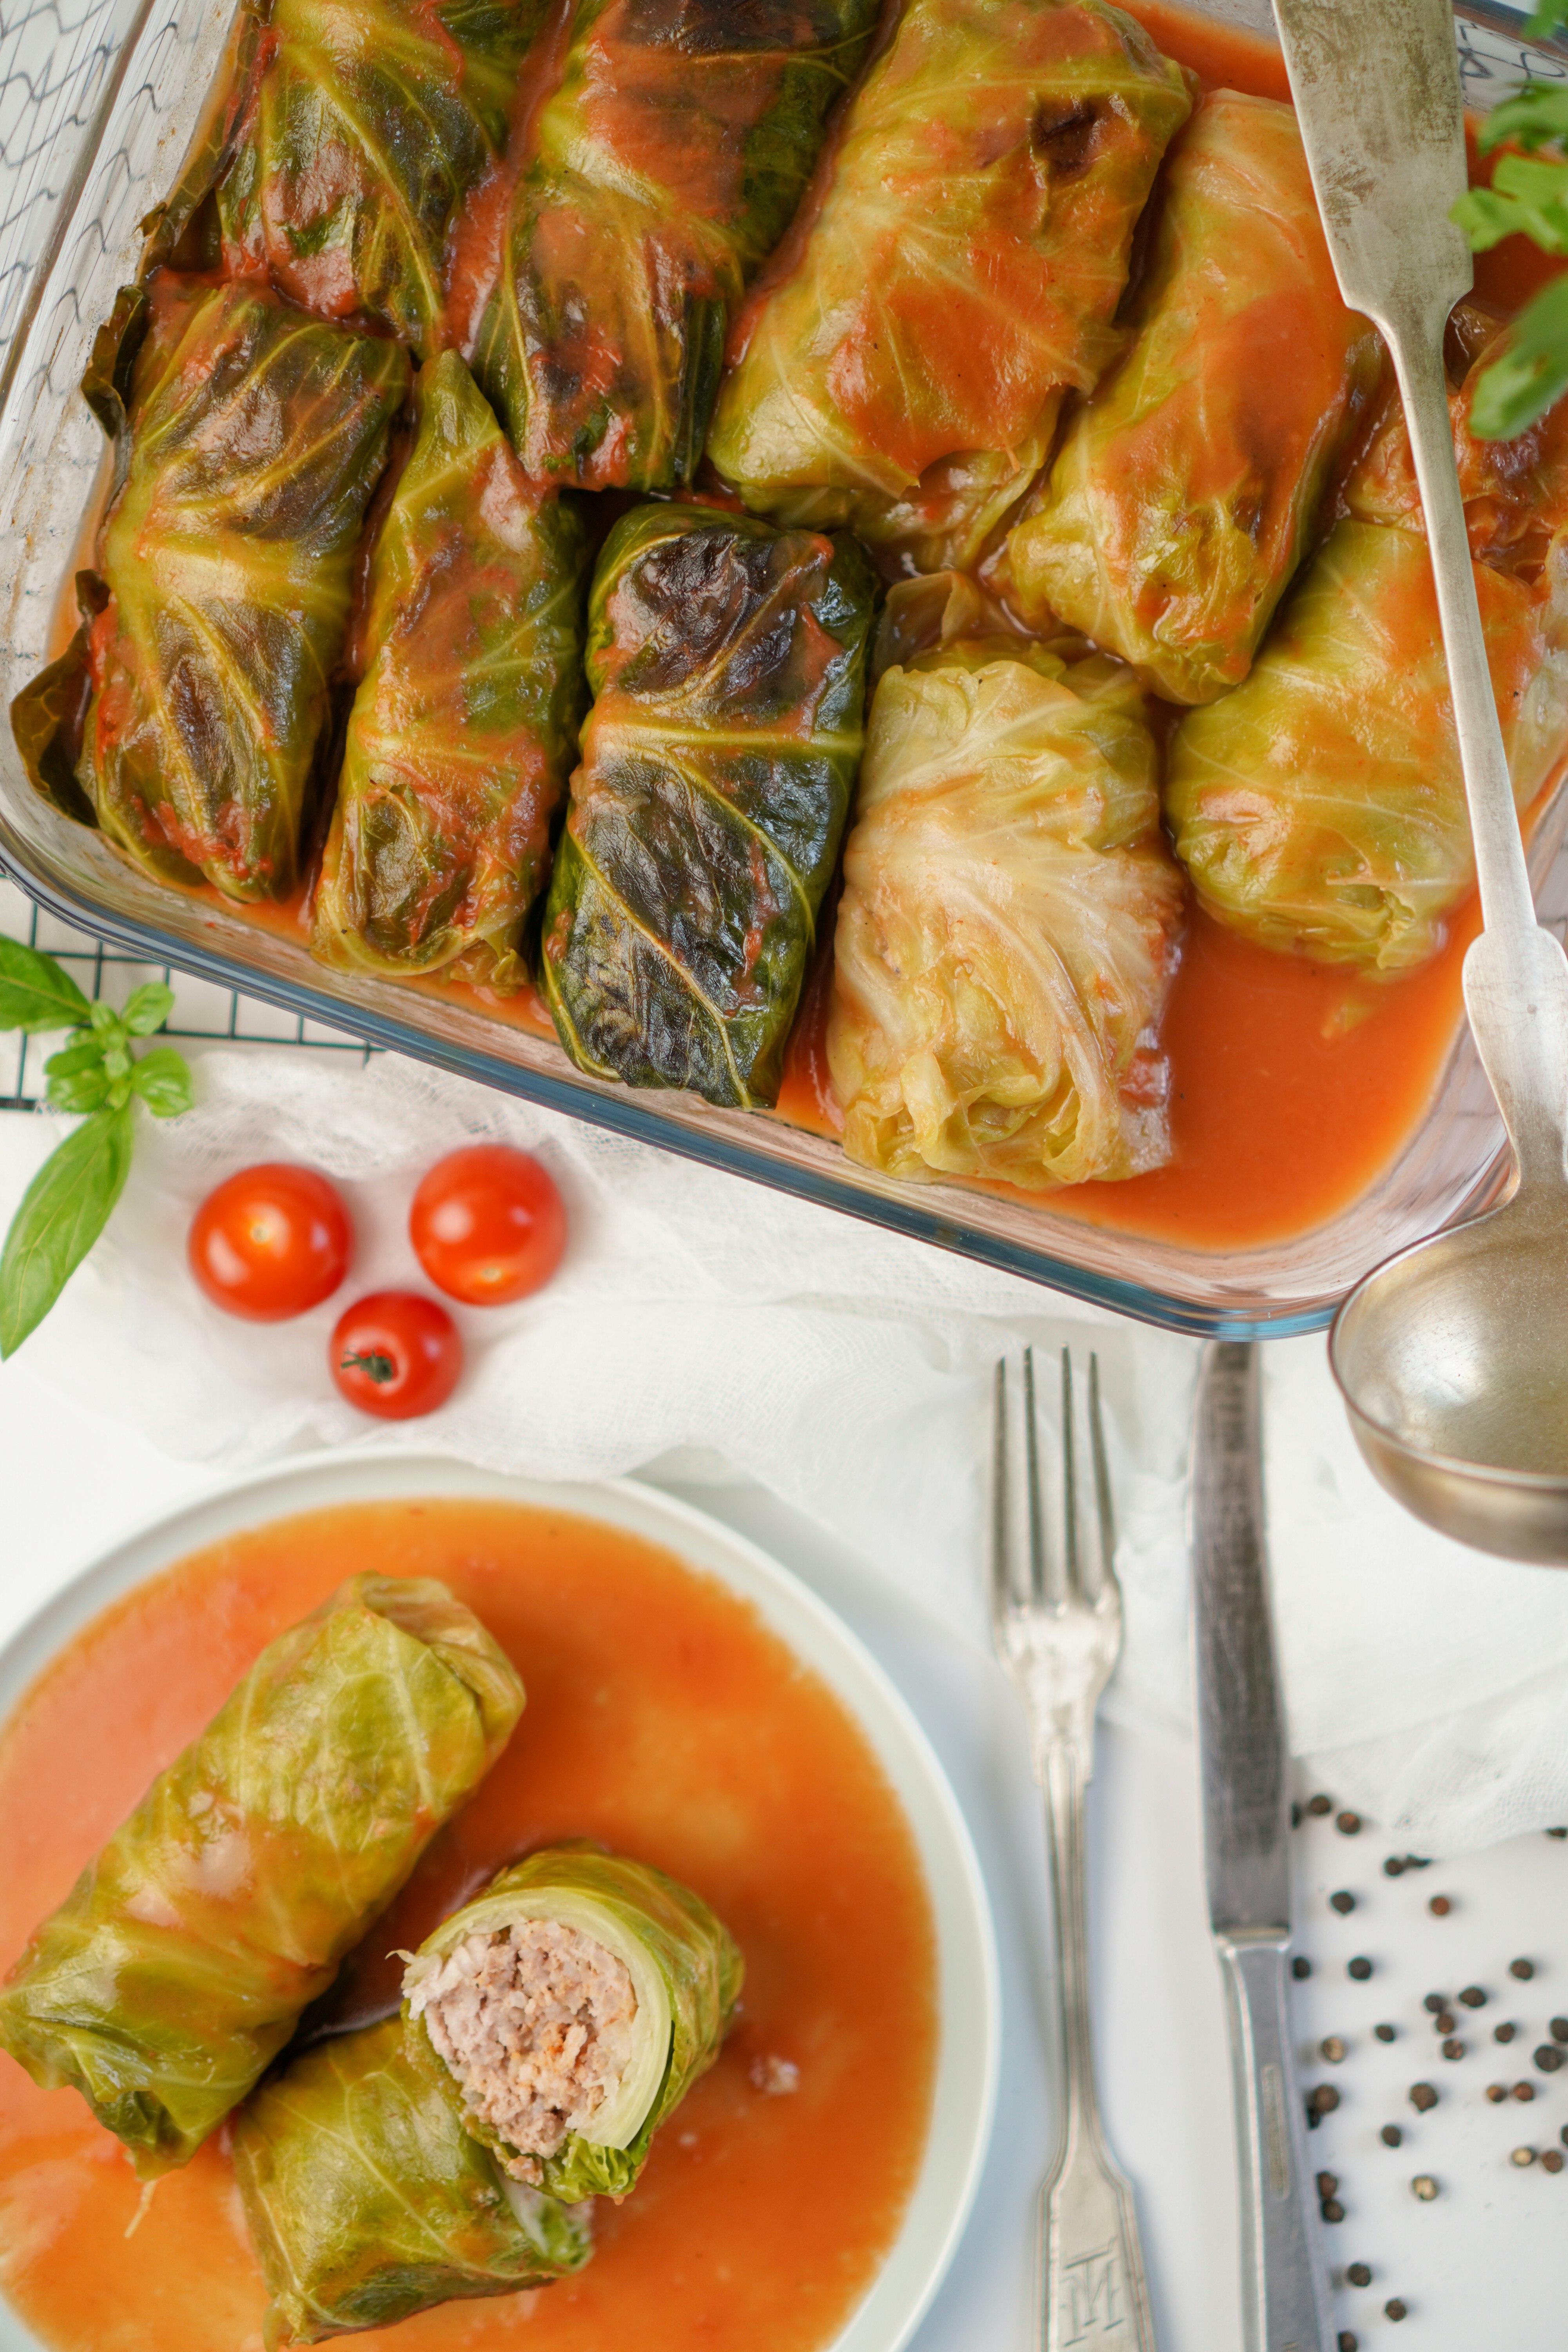 stuffed cabbage (minced meat and rice) in tomato sauce